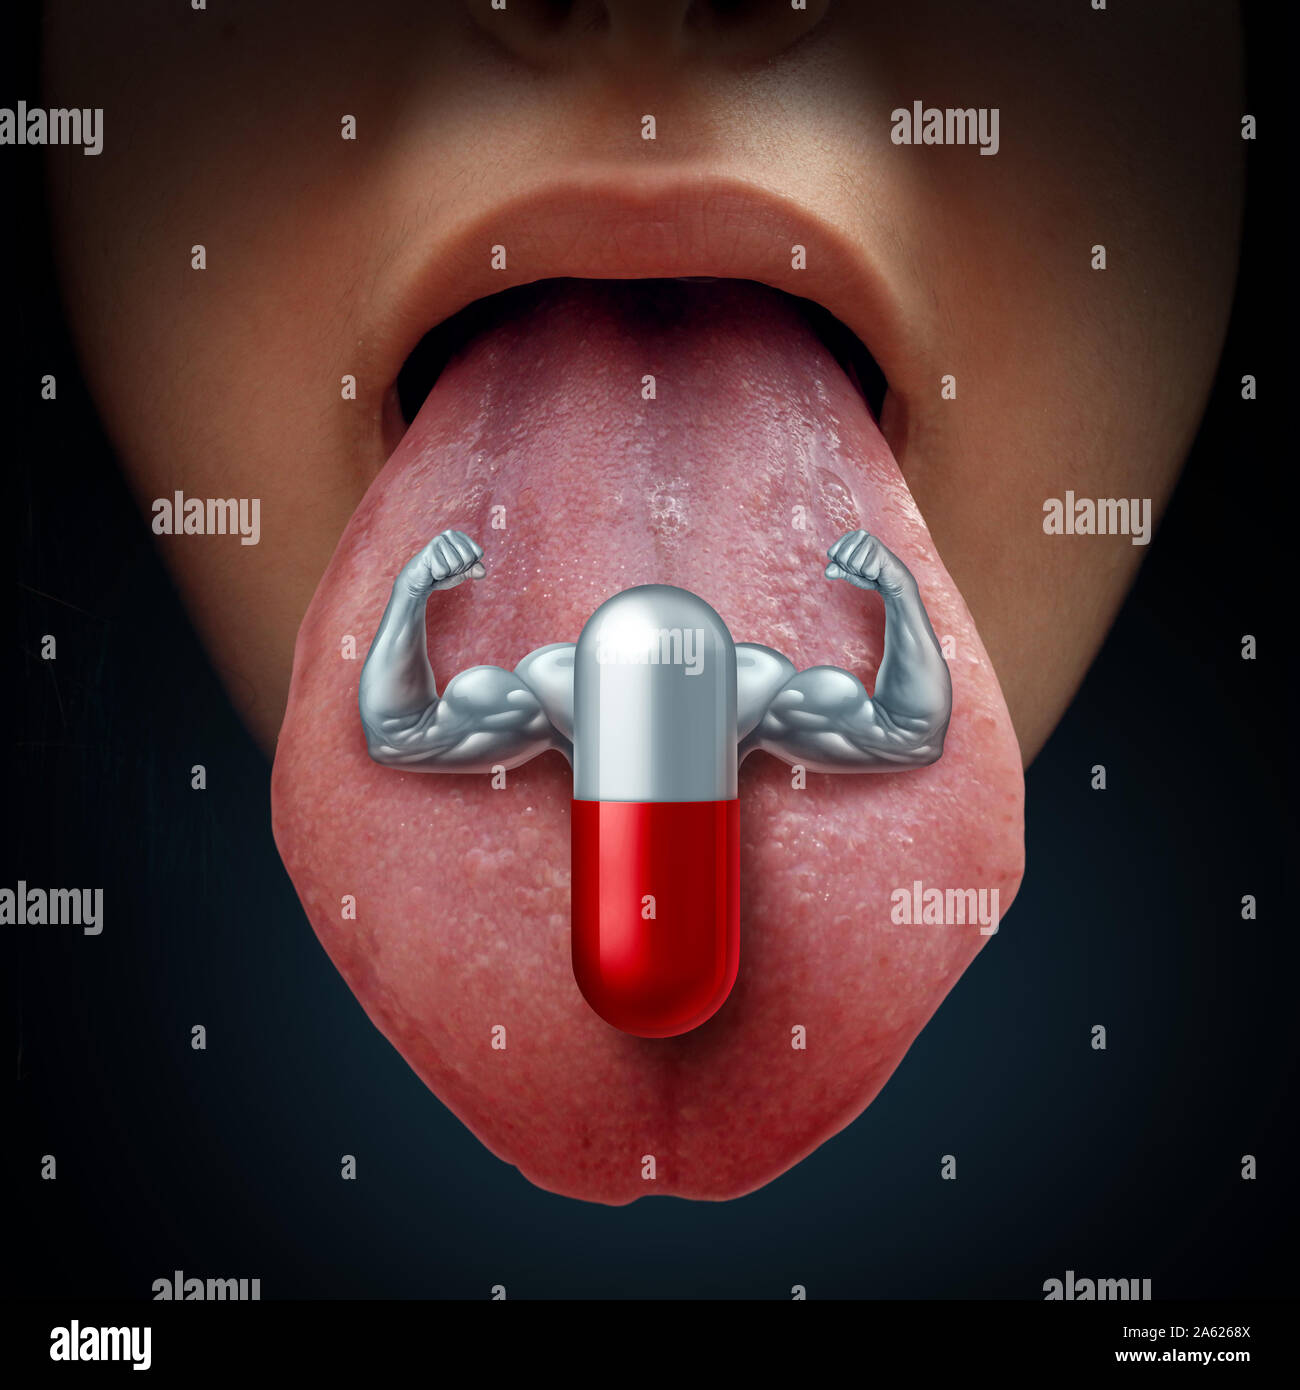 Power Pill and performance enhancing medicine concept of a prescription drug and energy nutritional supplement on the tongue as a medication. Stock Photo